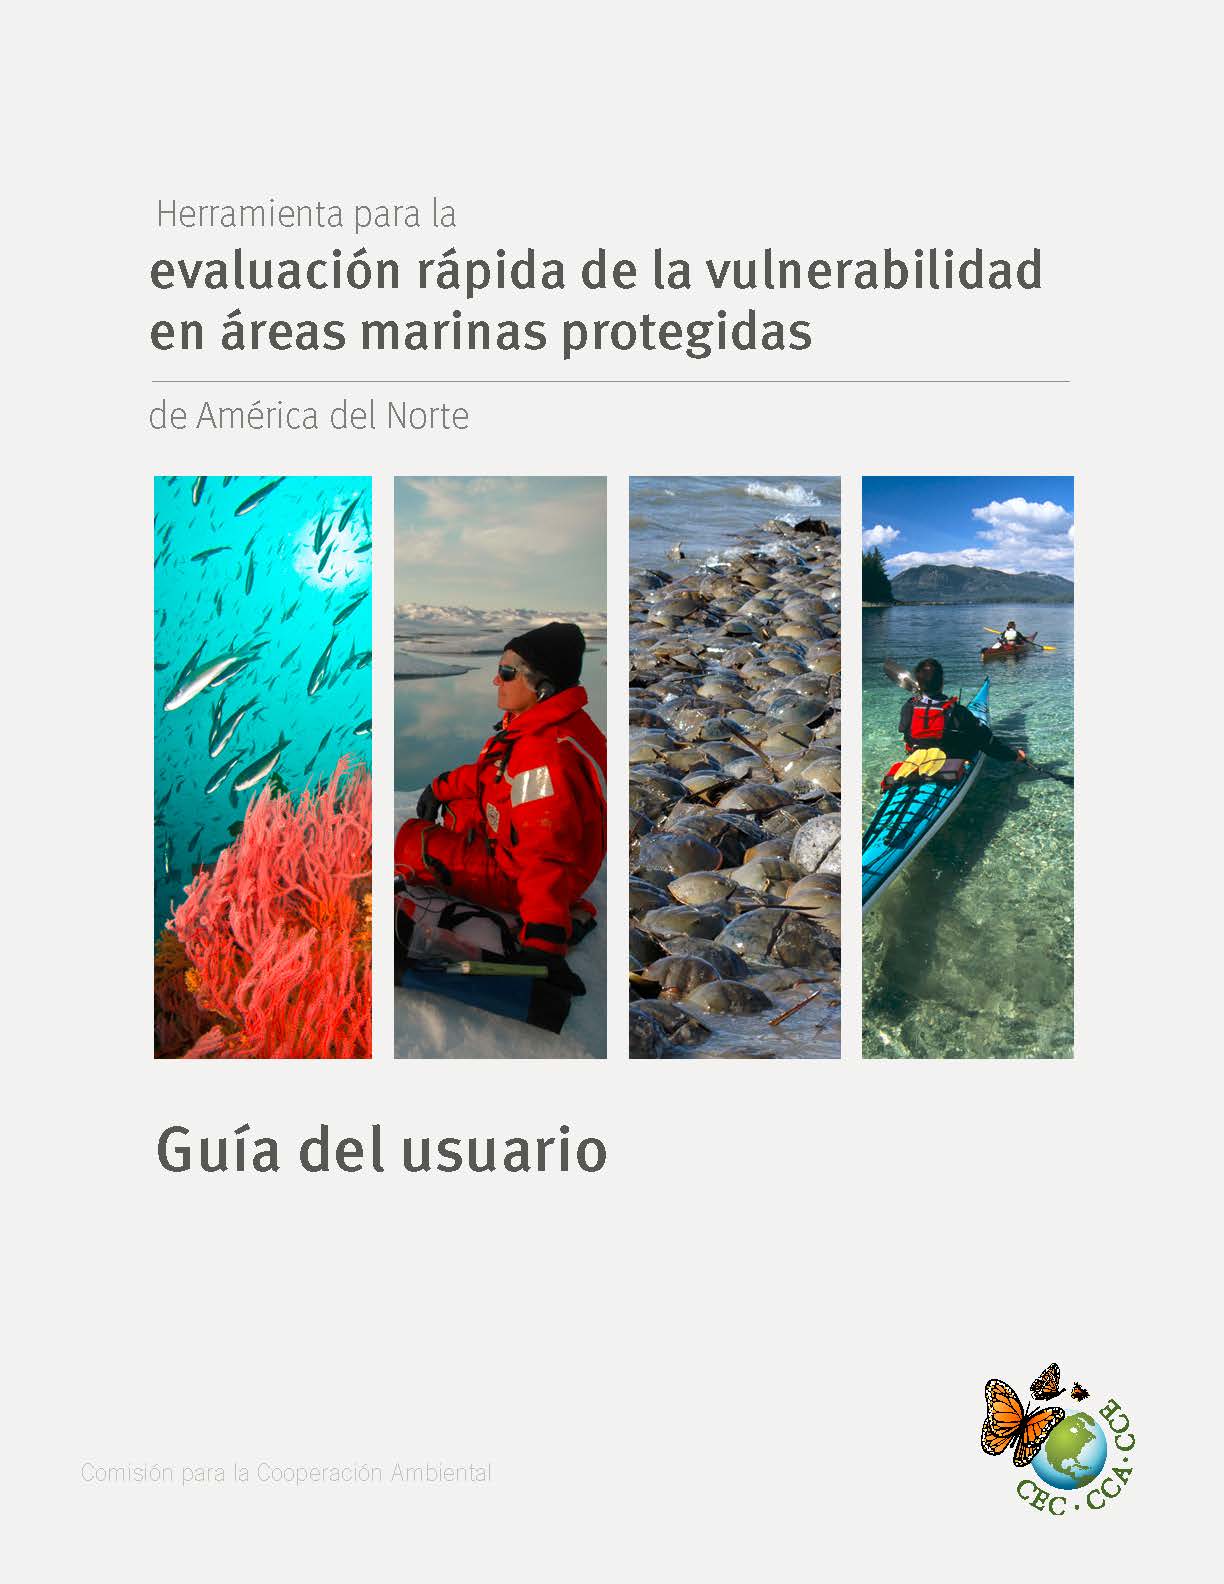 /cms/uploads/image/file/579388/11733-north-american-marine-protected-area-rapid-vulnerability-assessment-tool-es.jpg